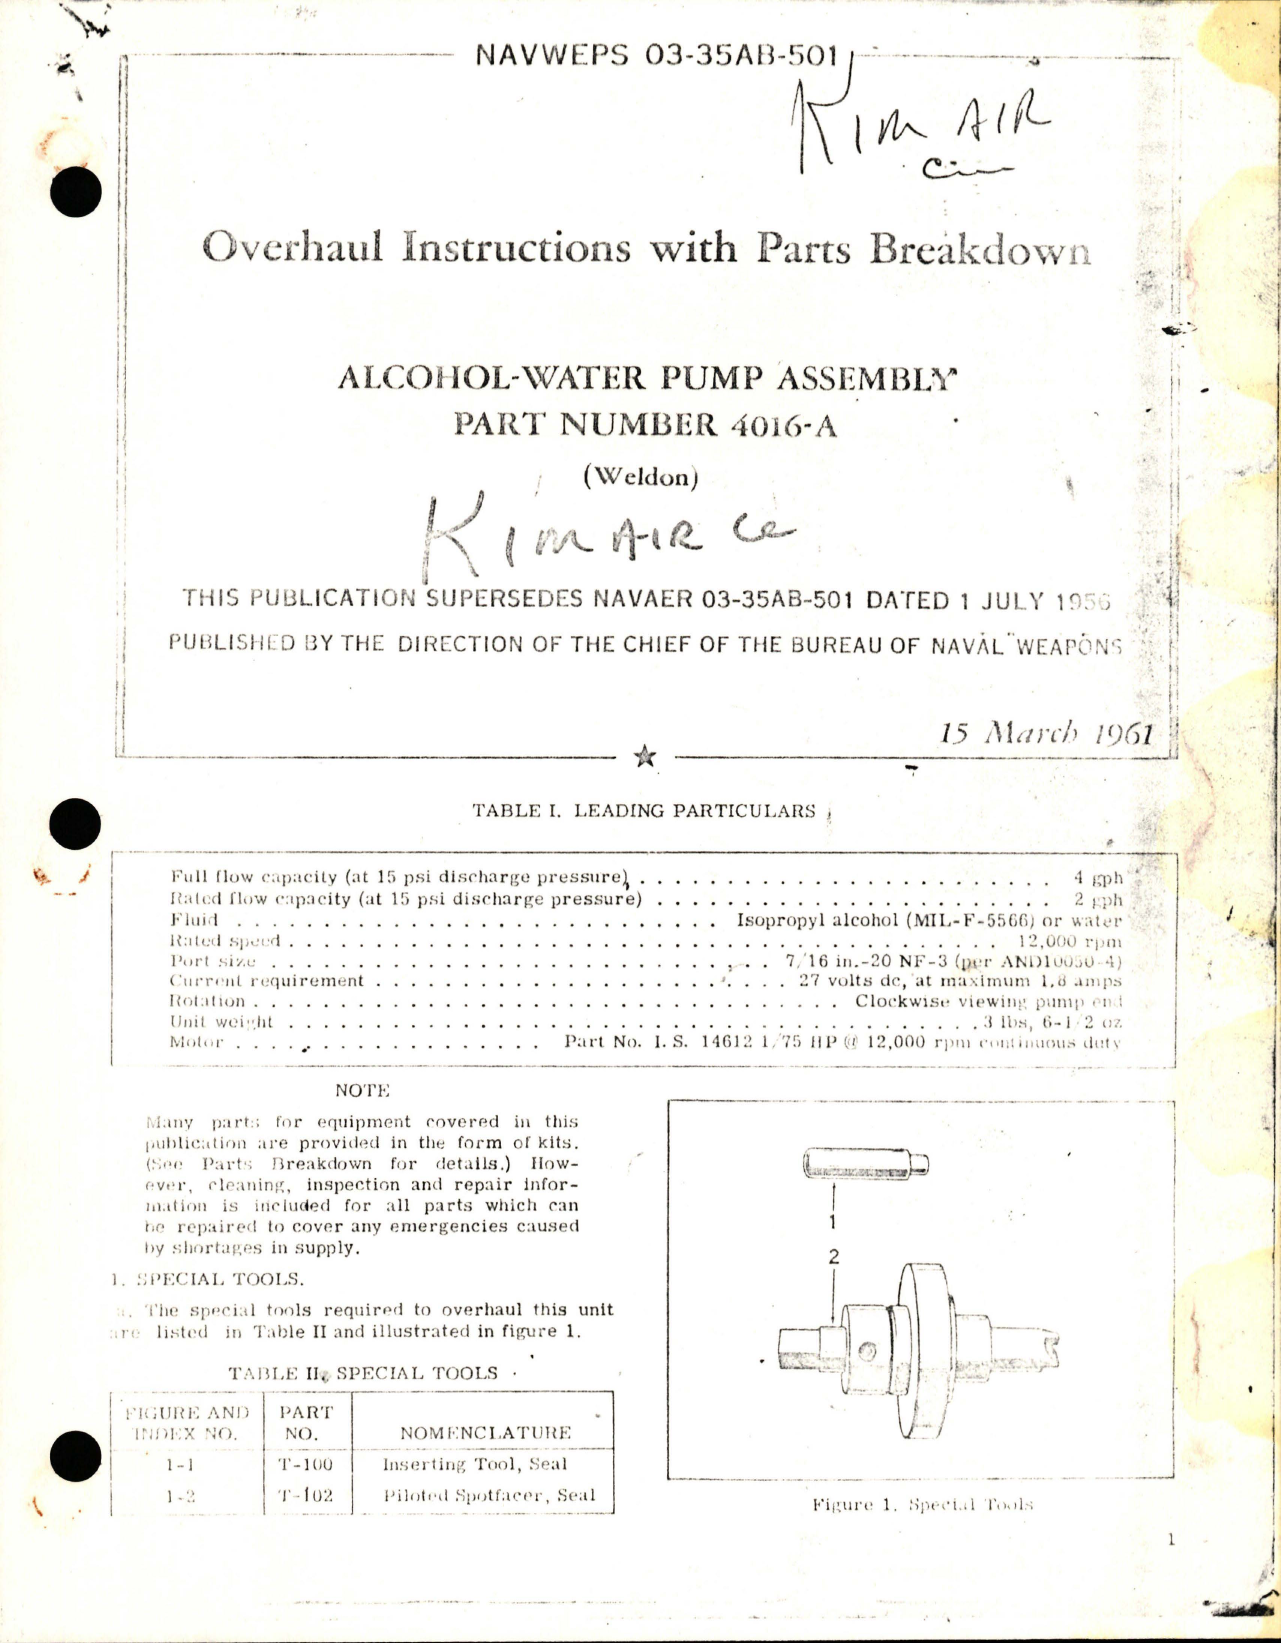 Sample page 1 from AirCorps Library document: Overhaul Instructions with Parts for Alcohol-Water Pump Assembly - Part 4016-A